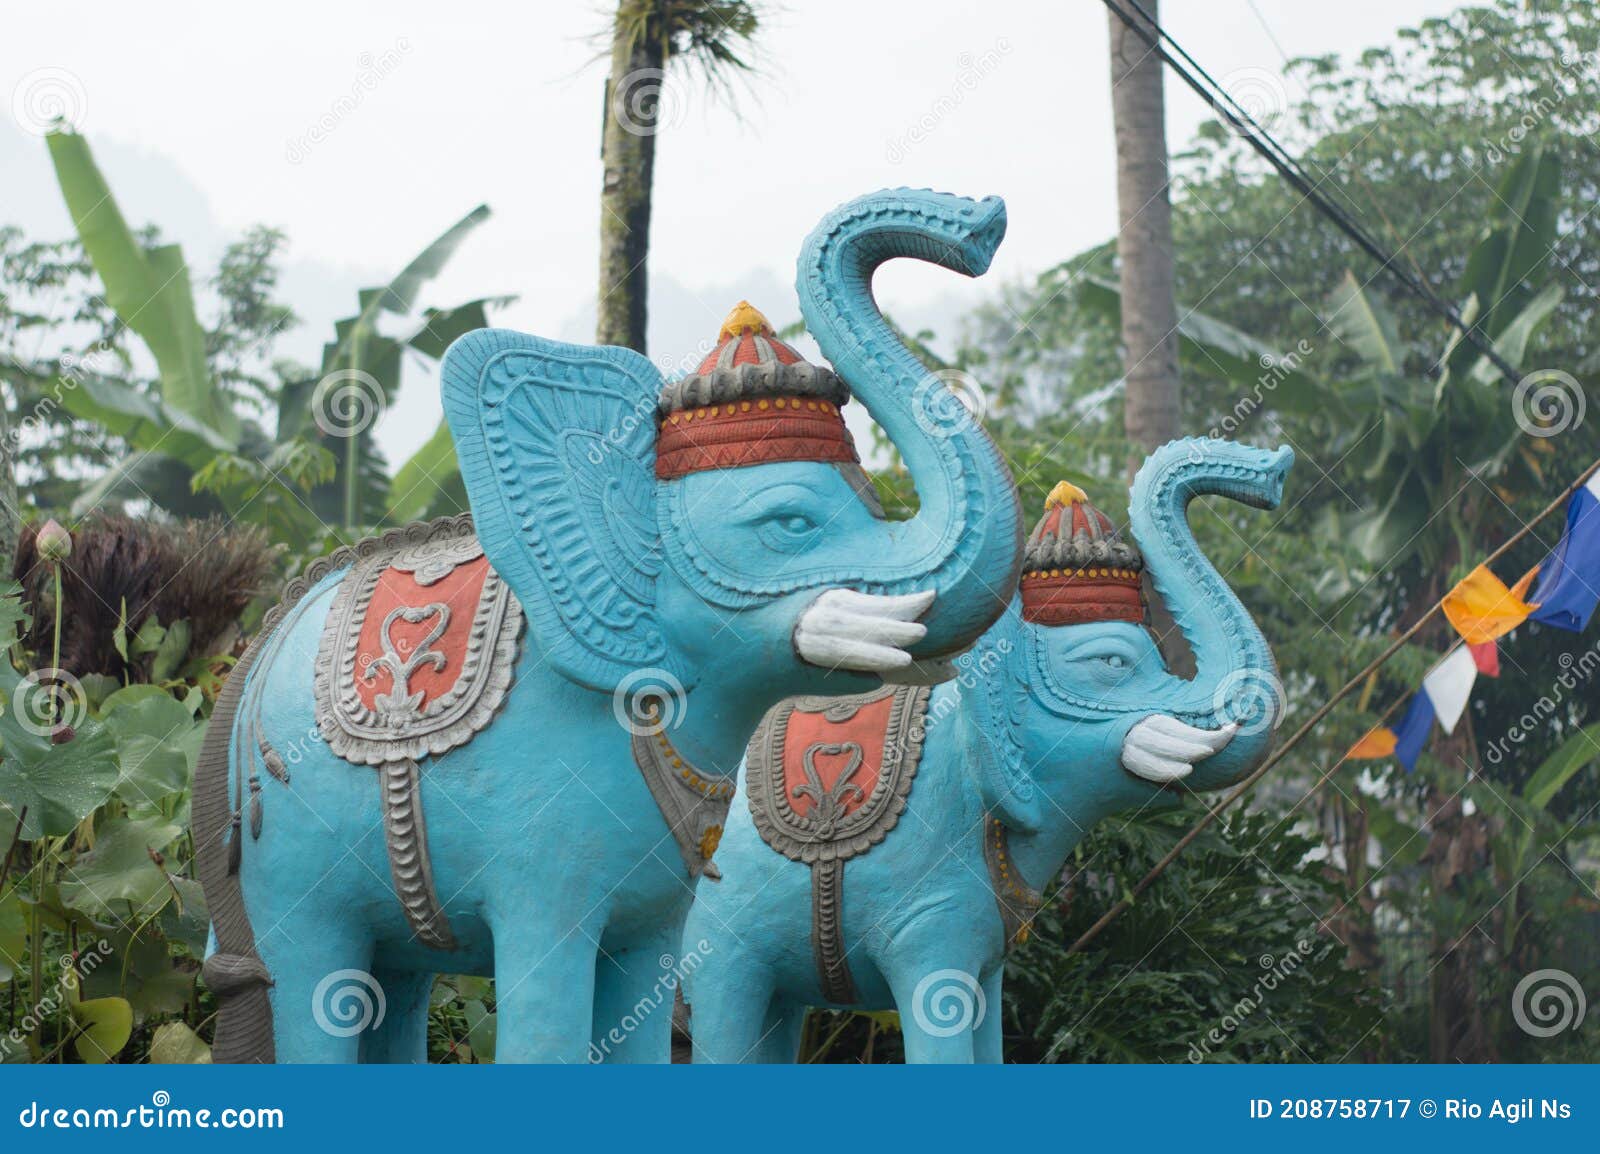 The Elephant as a Symbol of Good Luck and Prosperity in Buddhism - wide 4